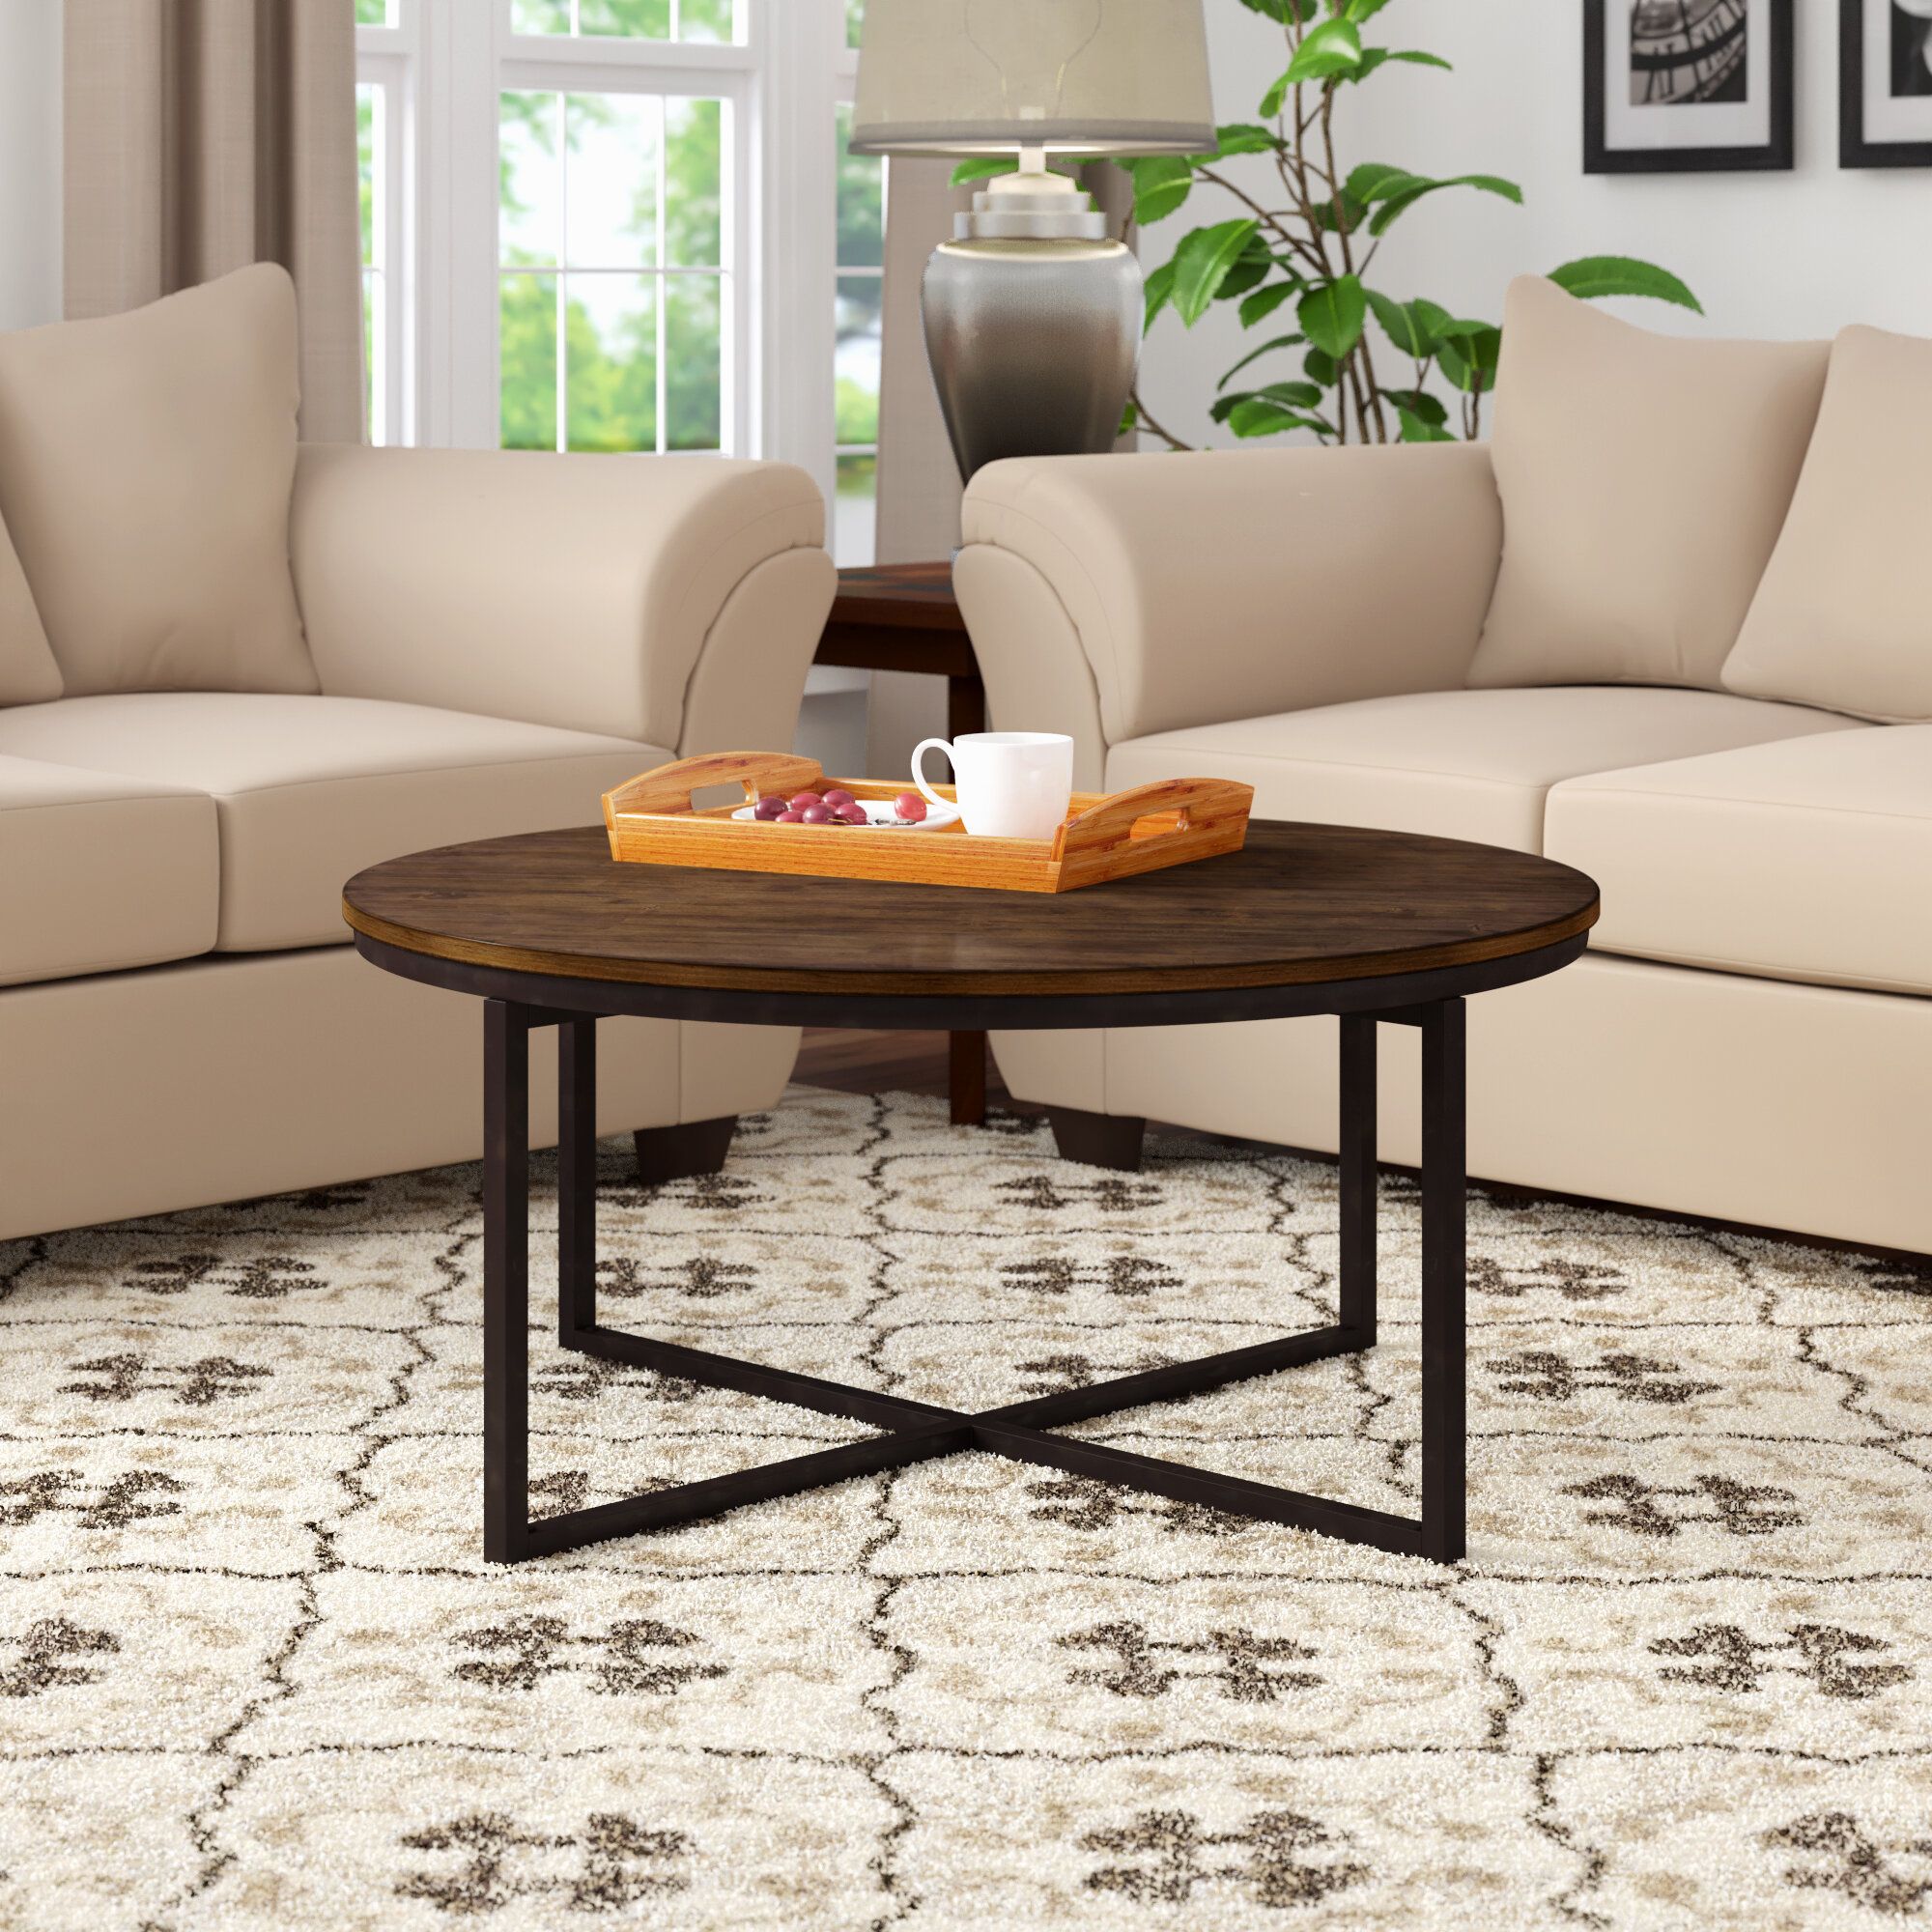 Laurel Foundry Modern Farmhouse Kersh Coffee Table & Reviews | Wayfair In Coffee Tables With Metal Legs (View 10 of 15)